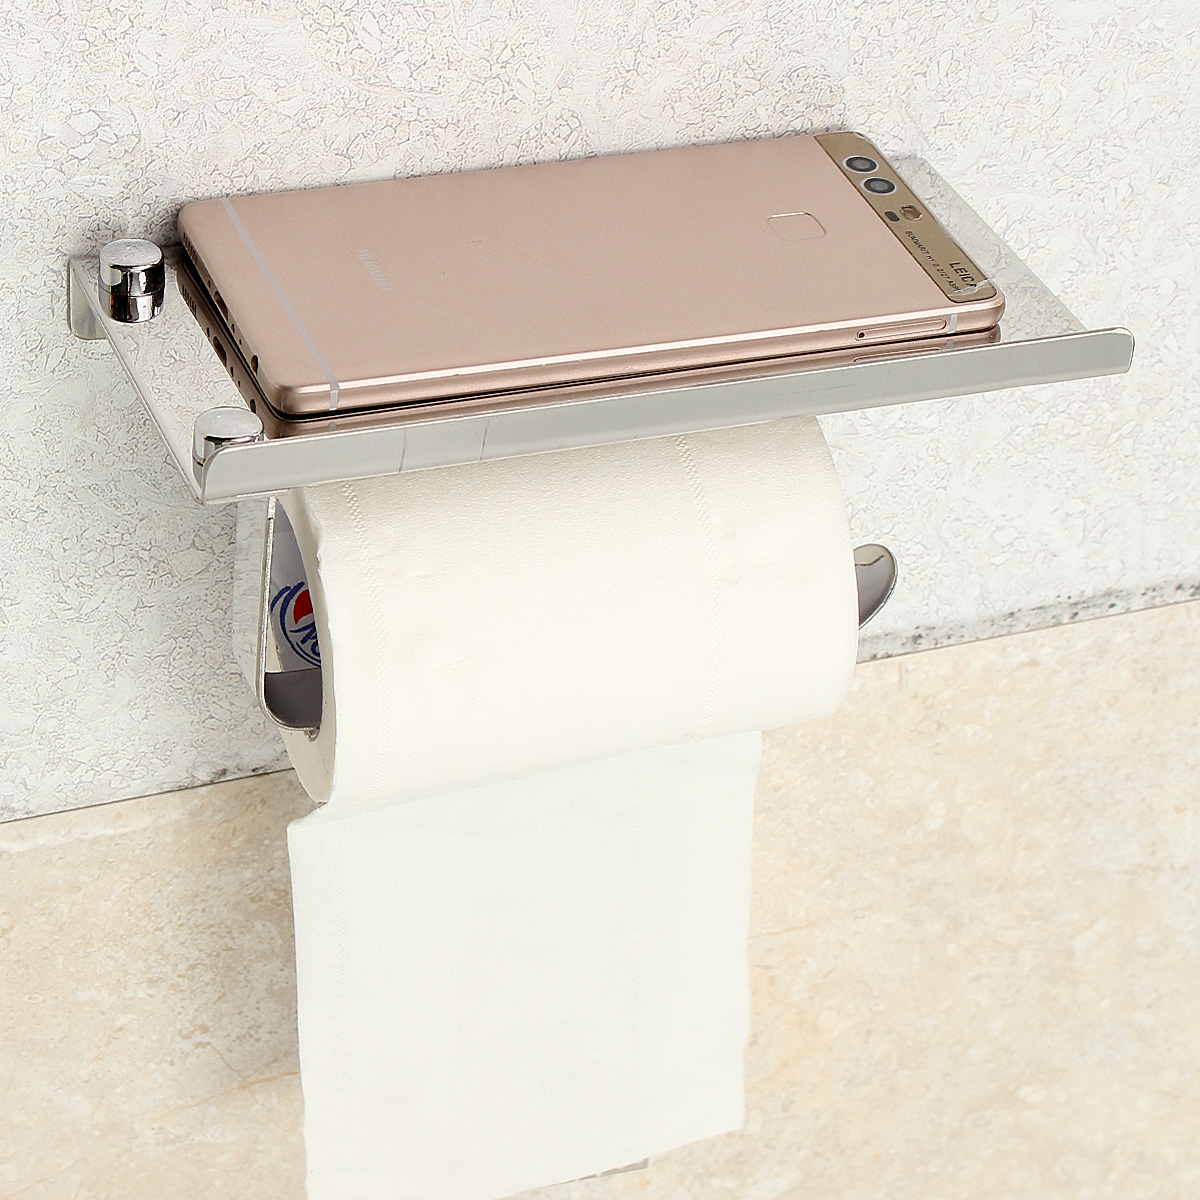 Stainless-Steel-Toilet-Roll-Tissue-Stand-Paper-Holder-Wall-Mounted-for-Home-Bathroom-Paper-Hook-1256427